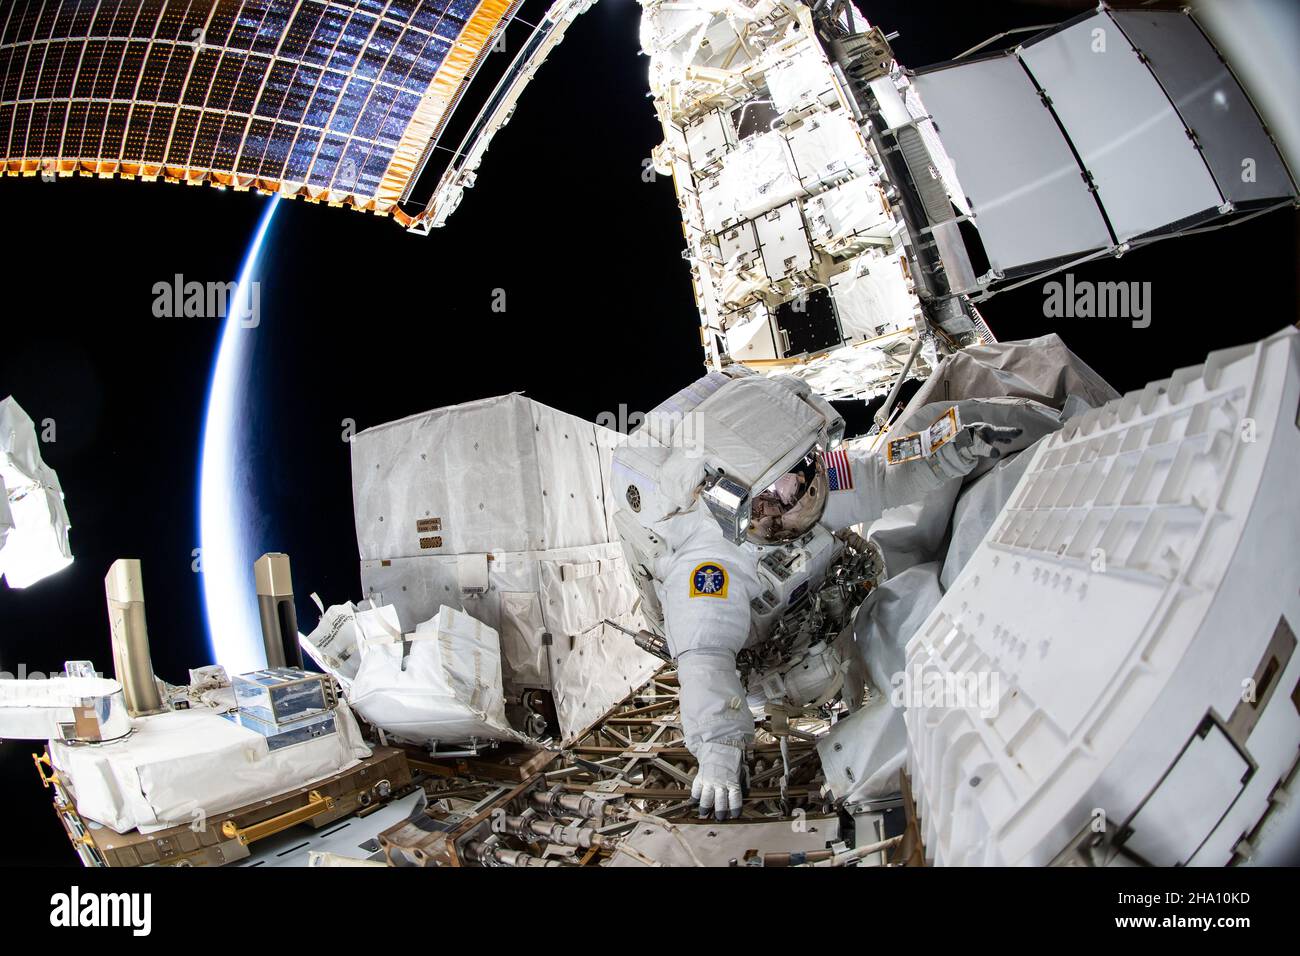 International Space Station, Earth Orbit. 02 December, 2021. NASA astronaut Kayla Barron during her six-hour and 32 minute spacewalk to replace a failed antenna system on the International Space Station Port-1 truss structure, December 2, 2021 in Earth Orbit.  Credit: Thomas Marshburn/NASA/Alamy Live News Stock Photo